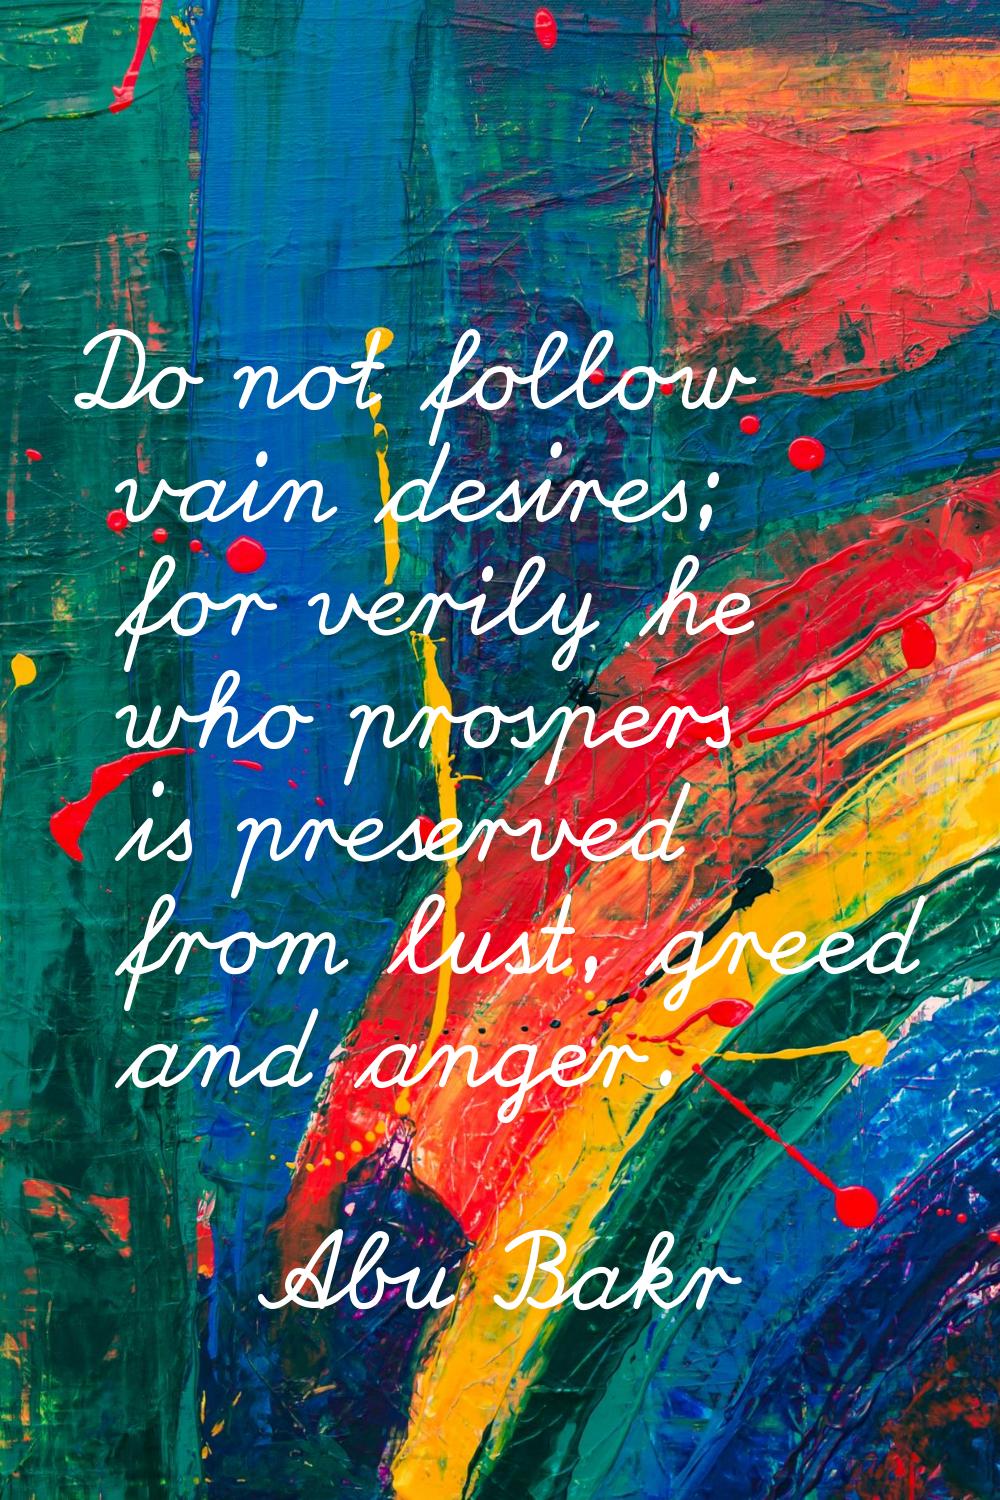 Do not follow vain desires; for verily he who prospers is preserved from lust, greed and anger.